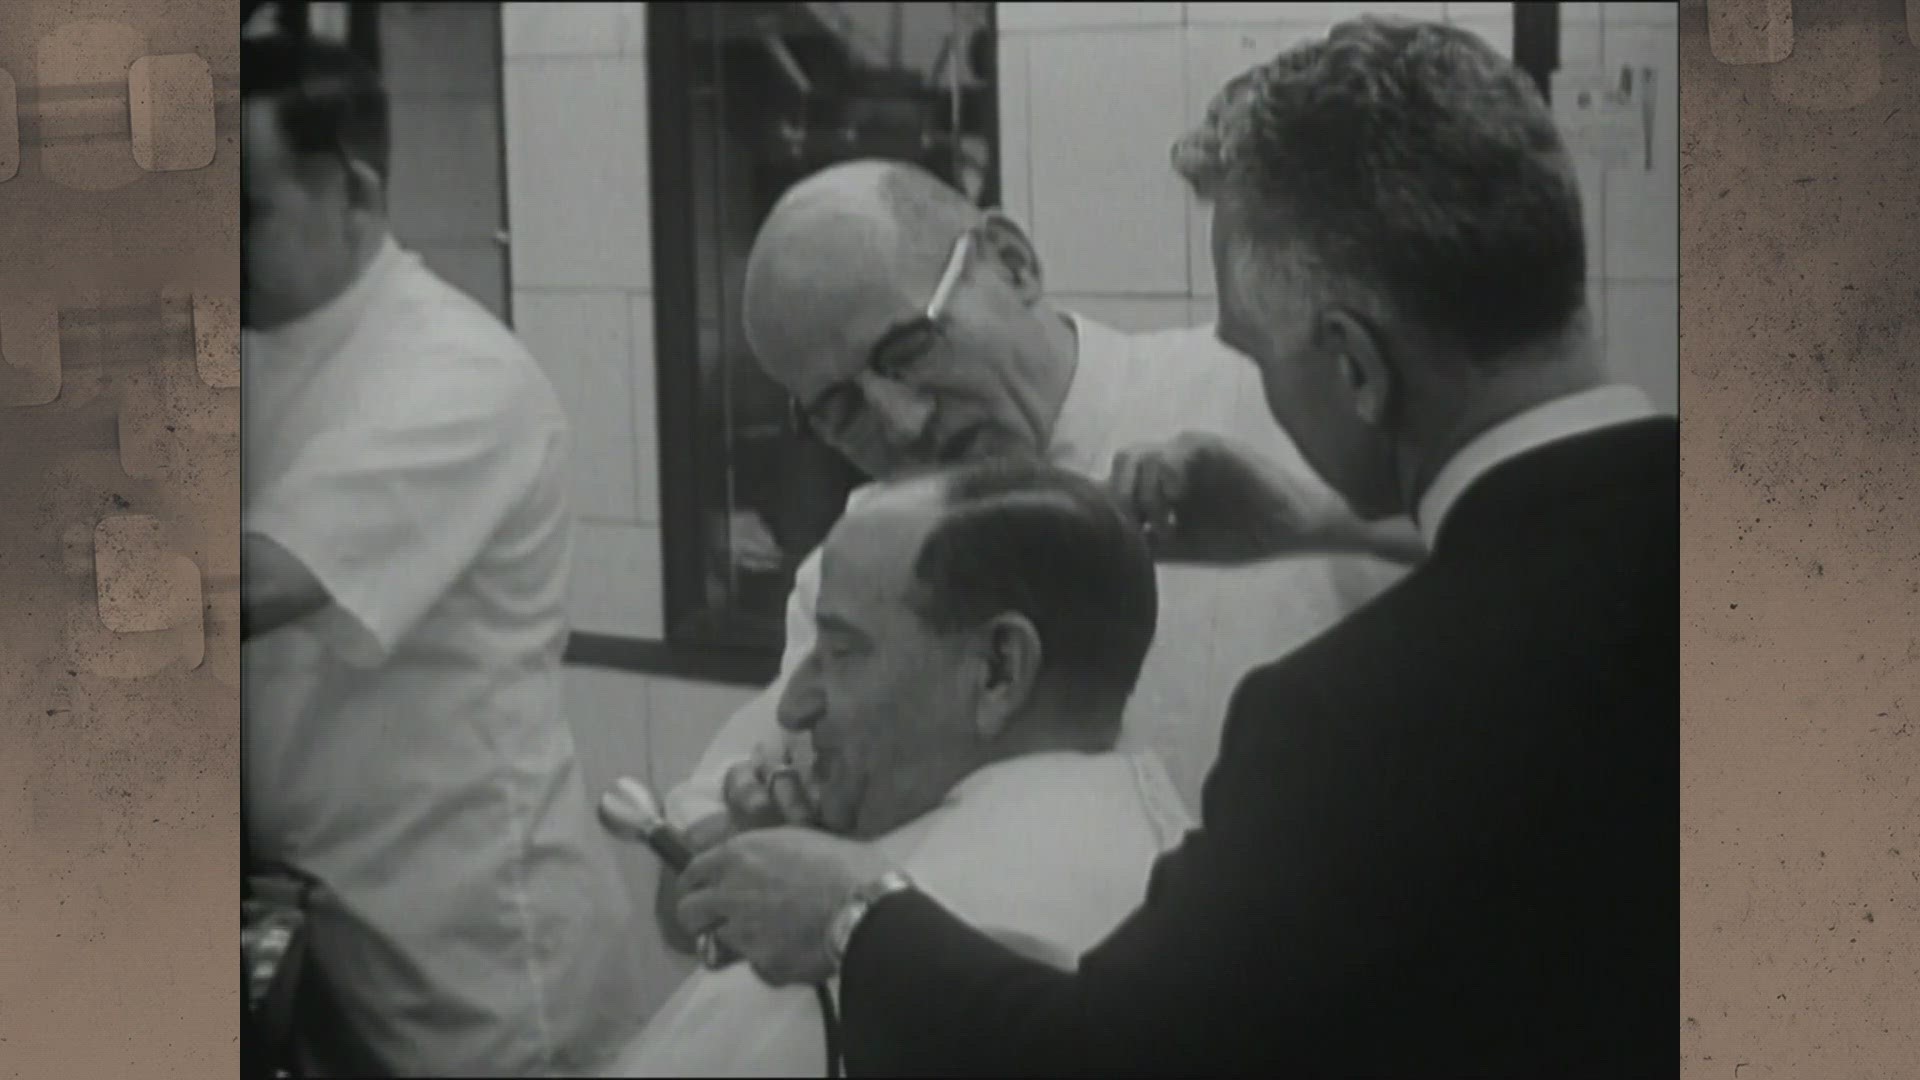 Our Vintage KSDK takes us back to the spring of 1966, when members of the Barber's Union voted to raise the price of haircuts from $2.25 to $2.50.